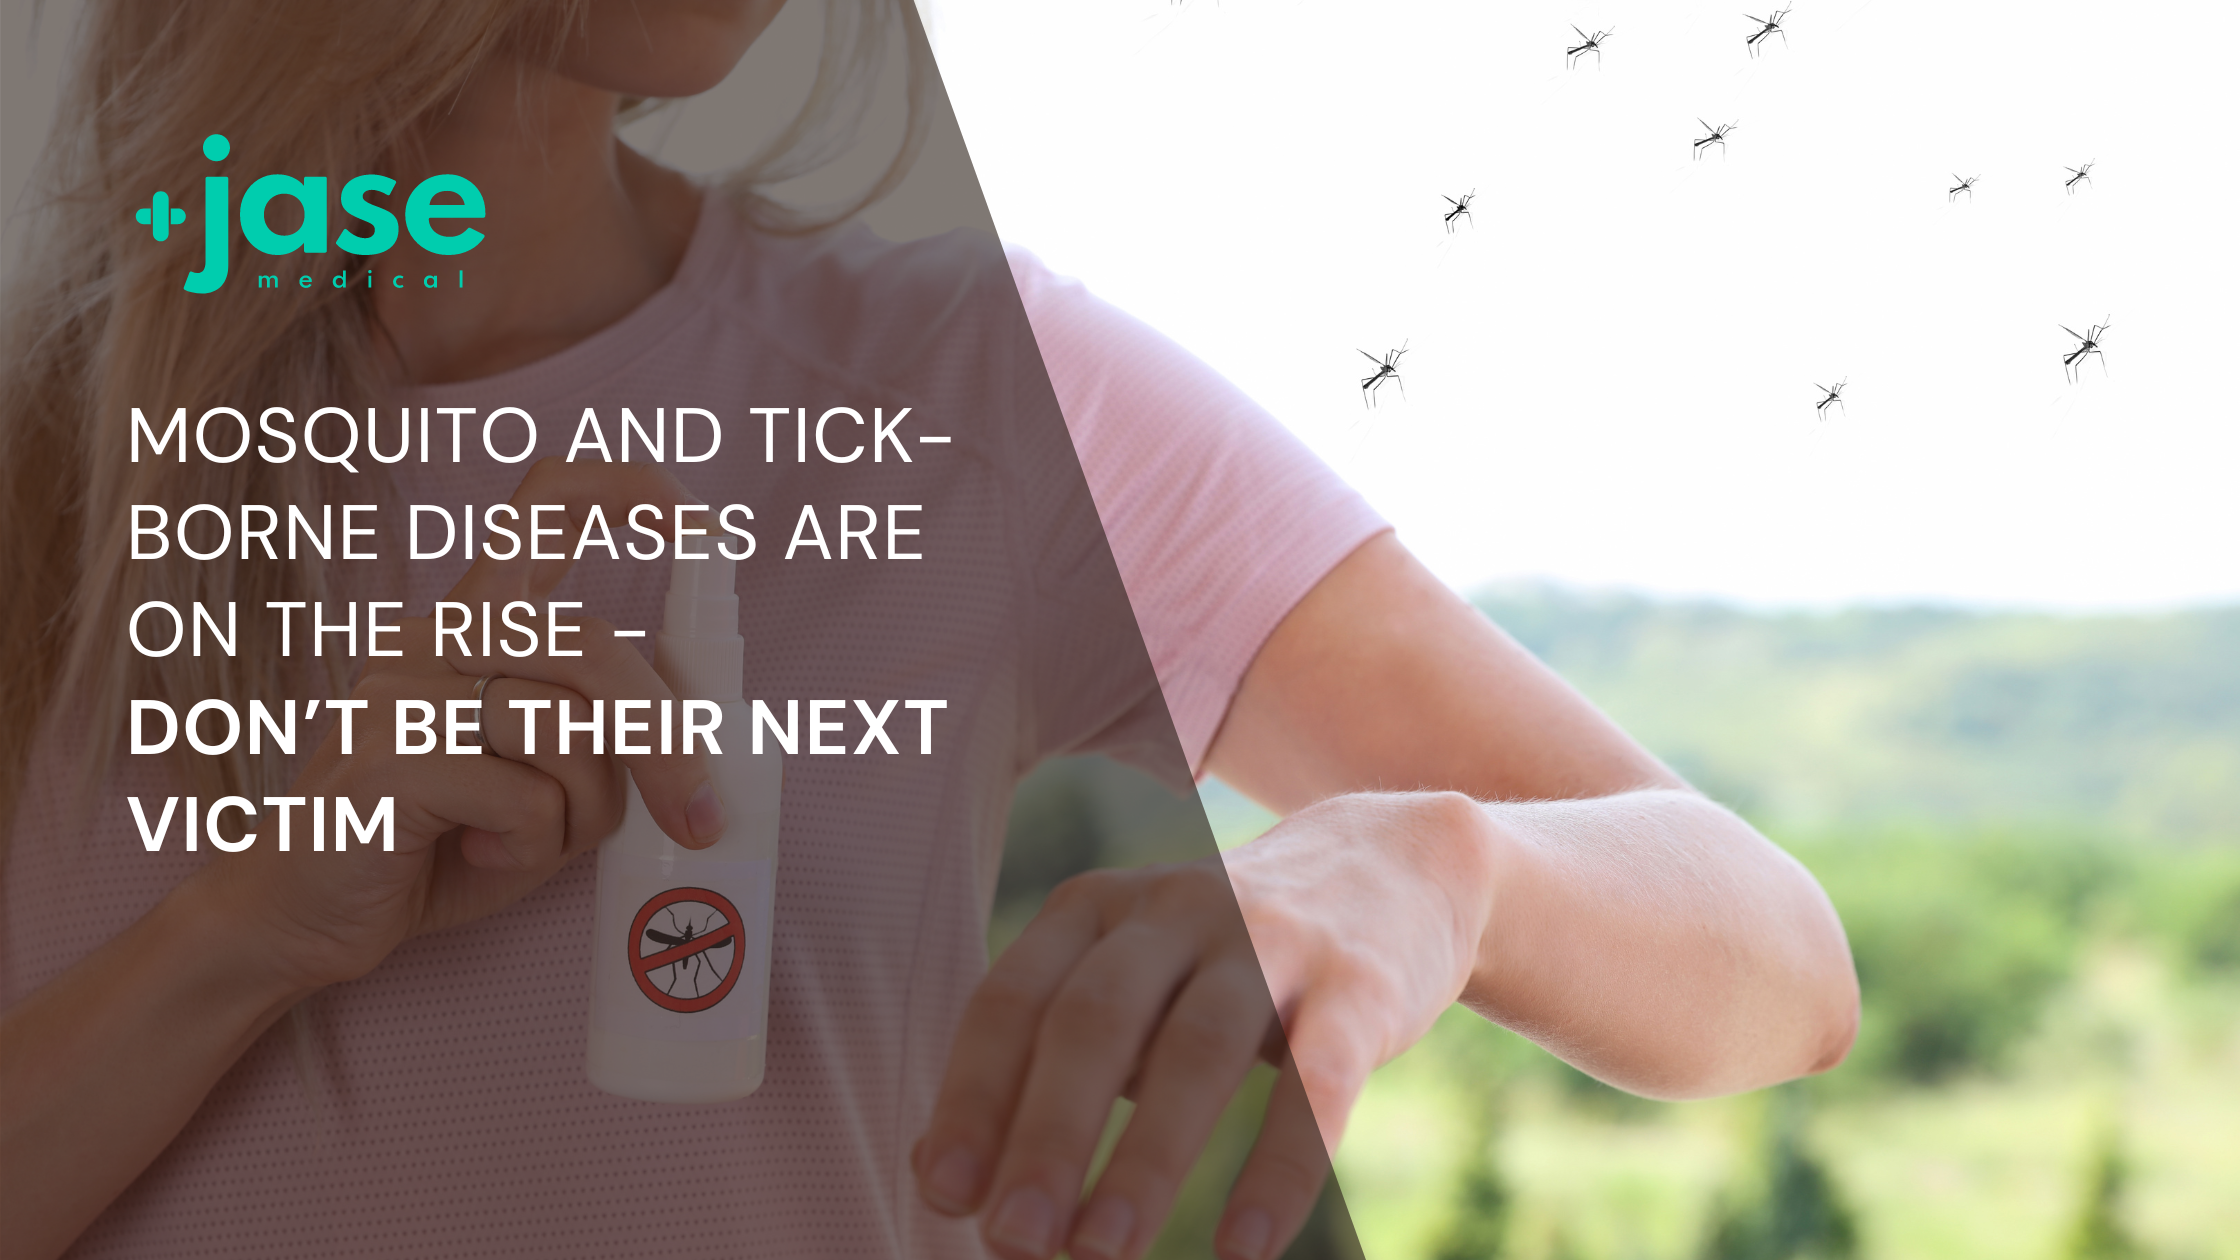 Mosquito and Tick-Borne Diseases are on the Rise &#8211; Don’t be Their Next Victim